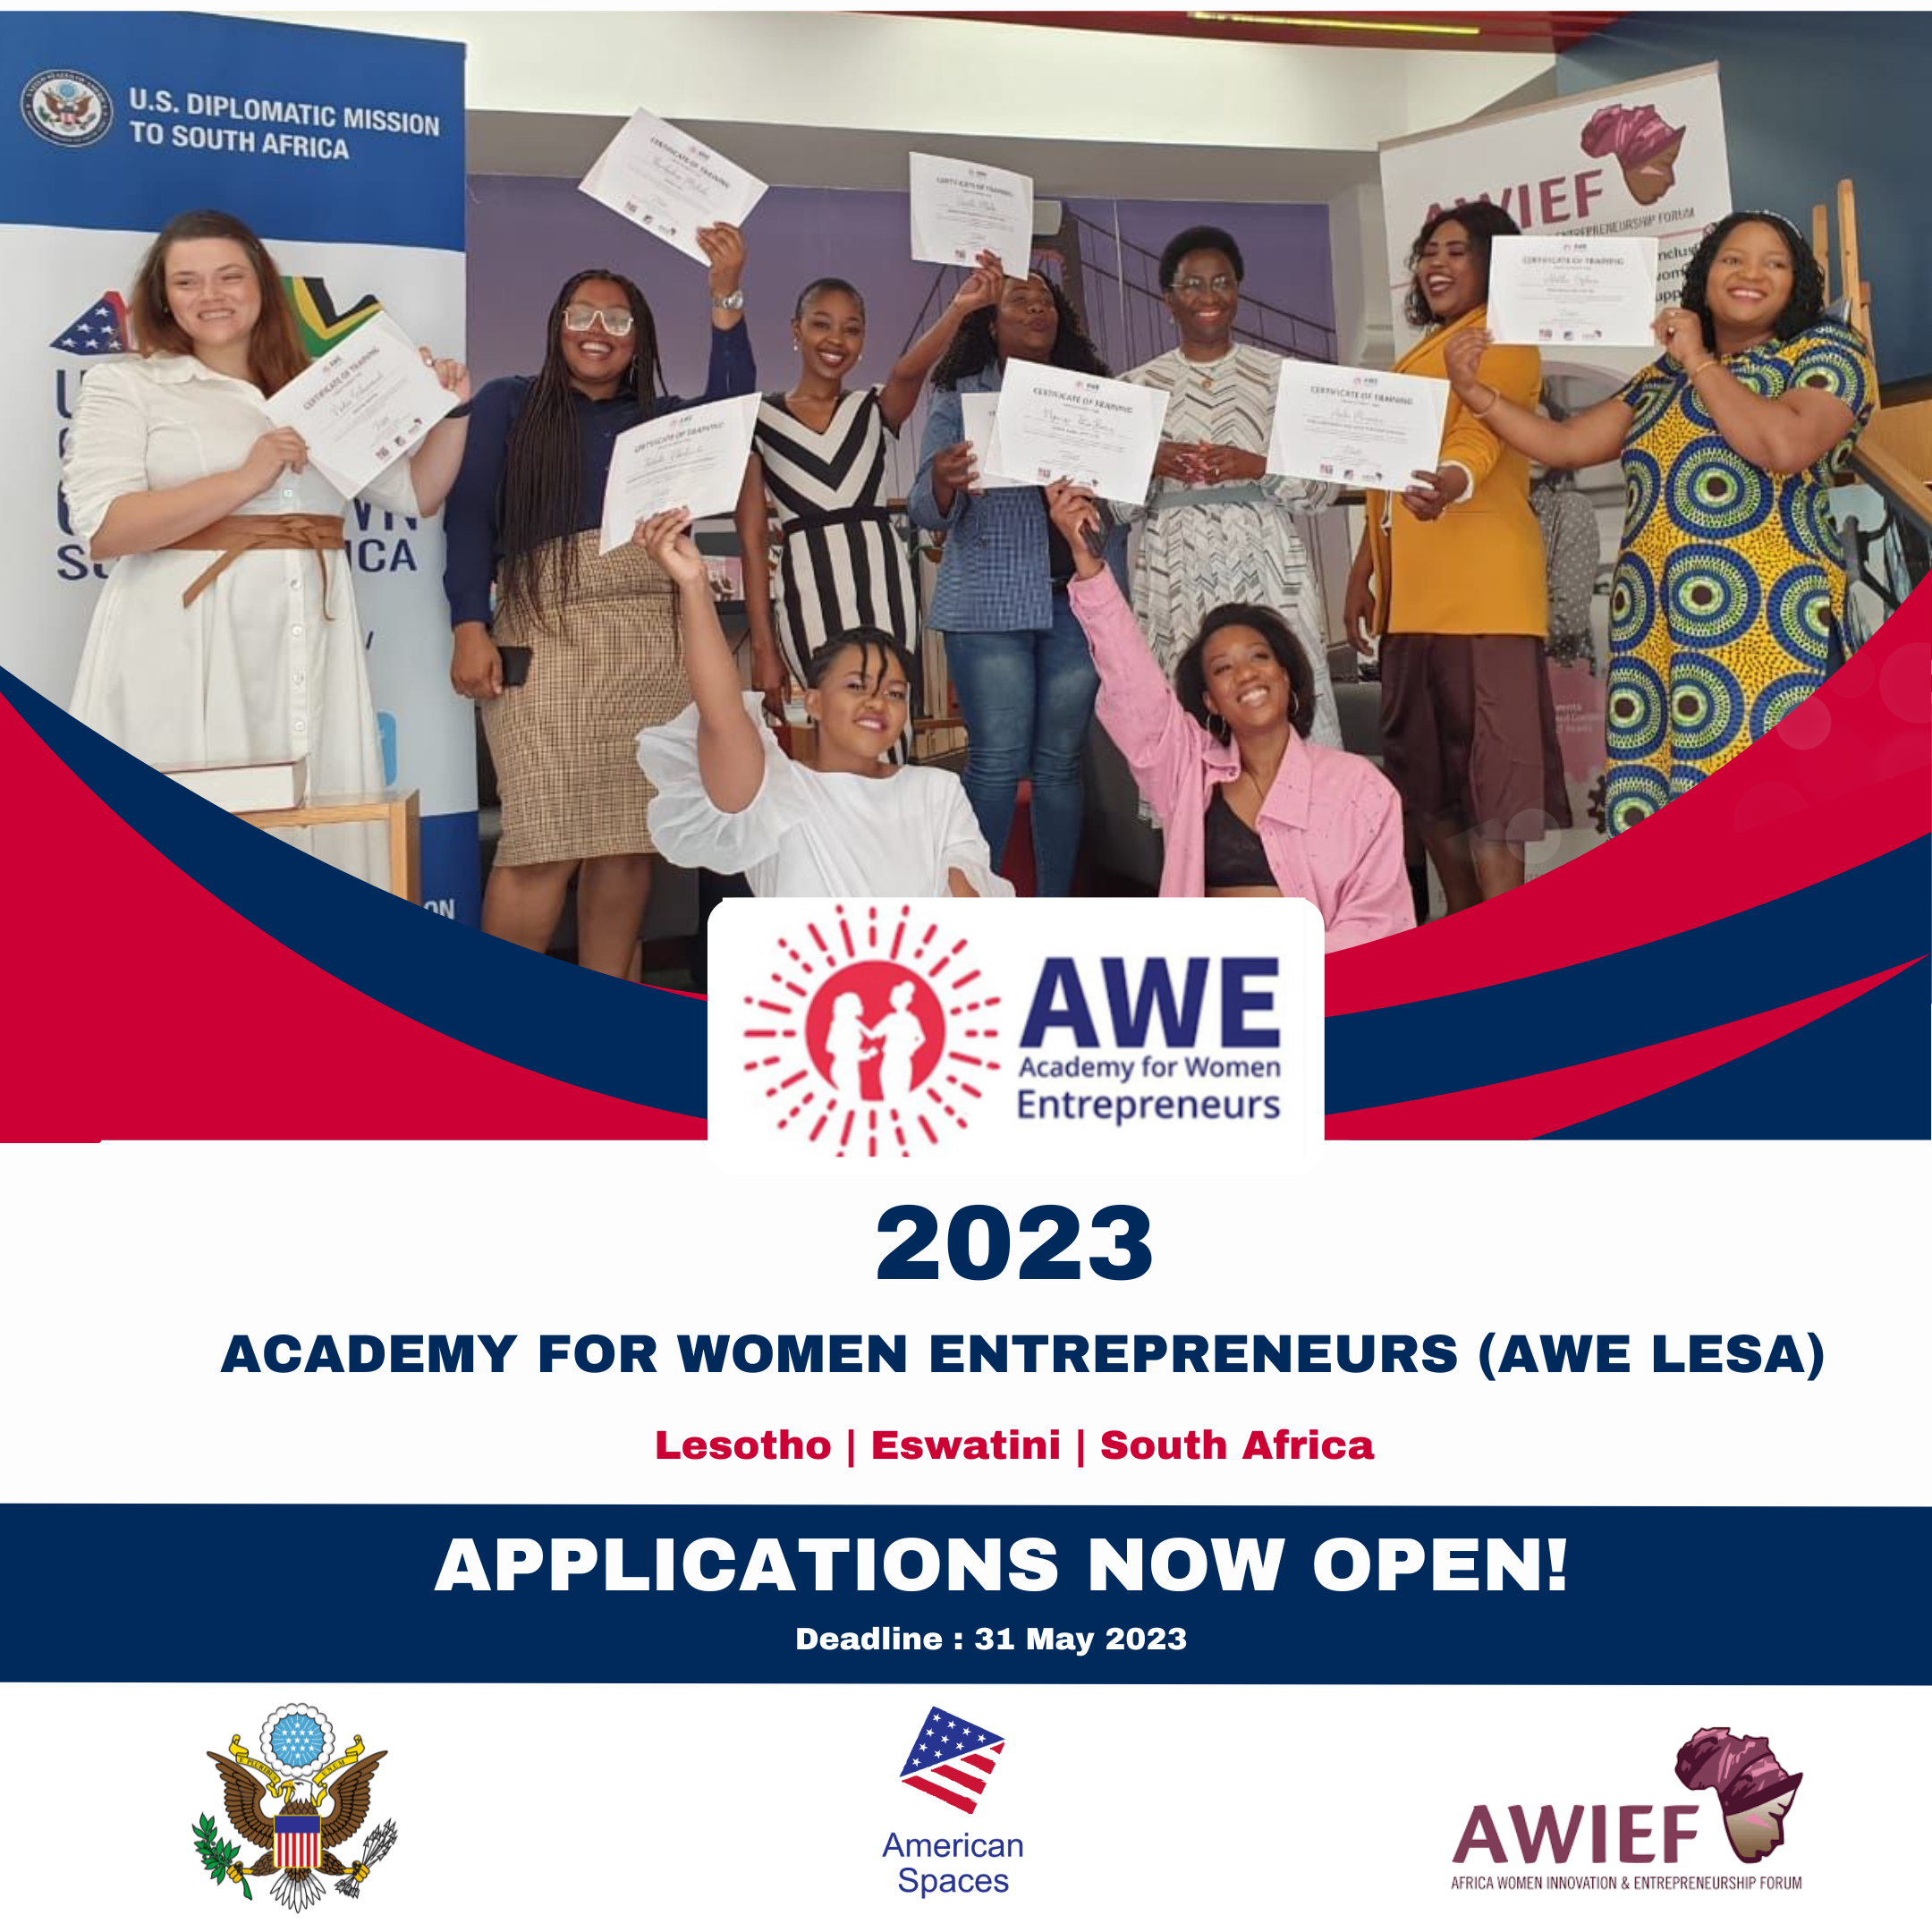 Apply: 2023 Academy for Women Entrepreneurs in Lesotho, Eswatini and South Africa